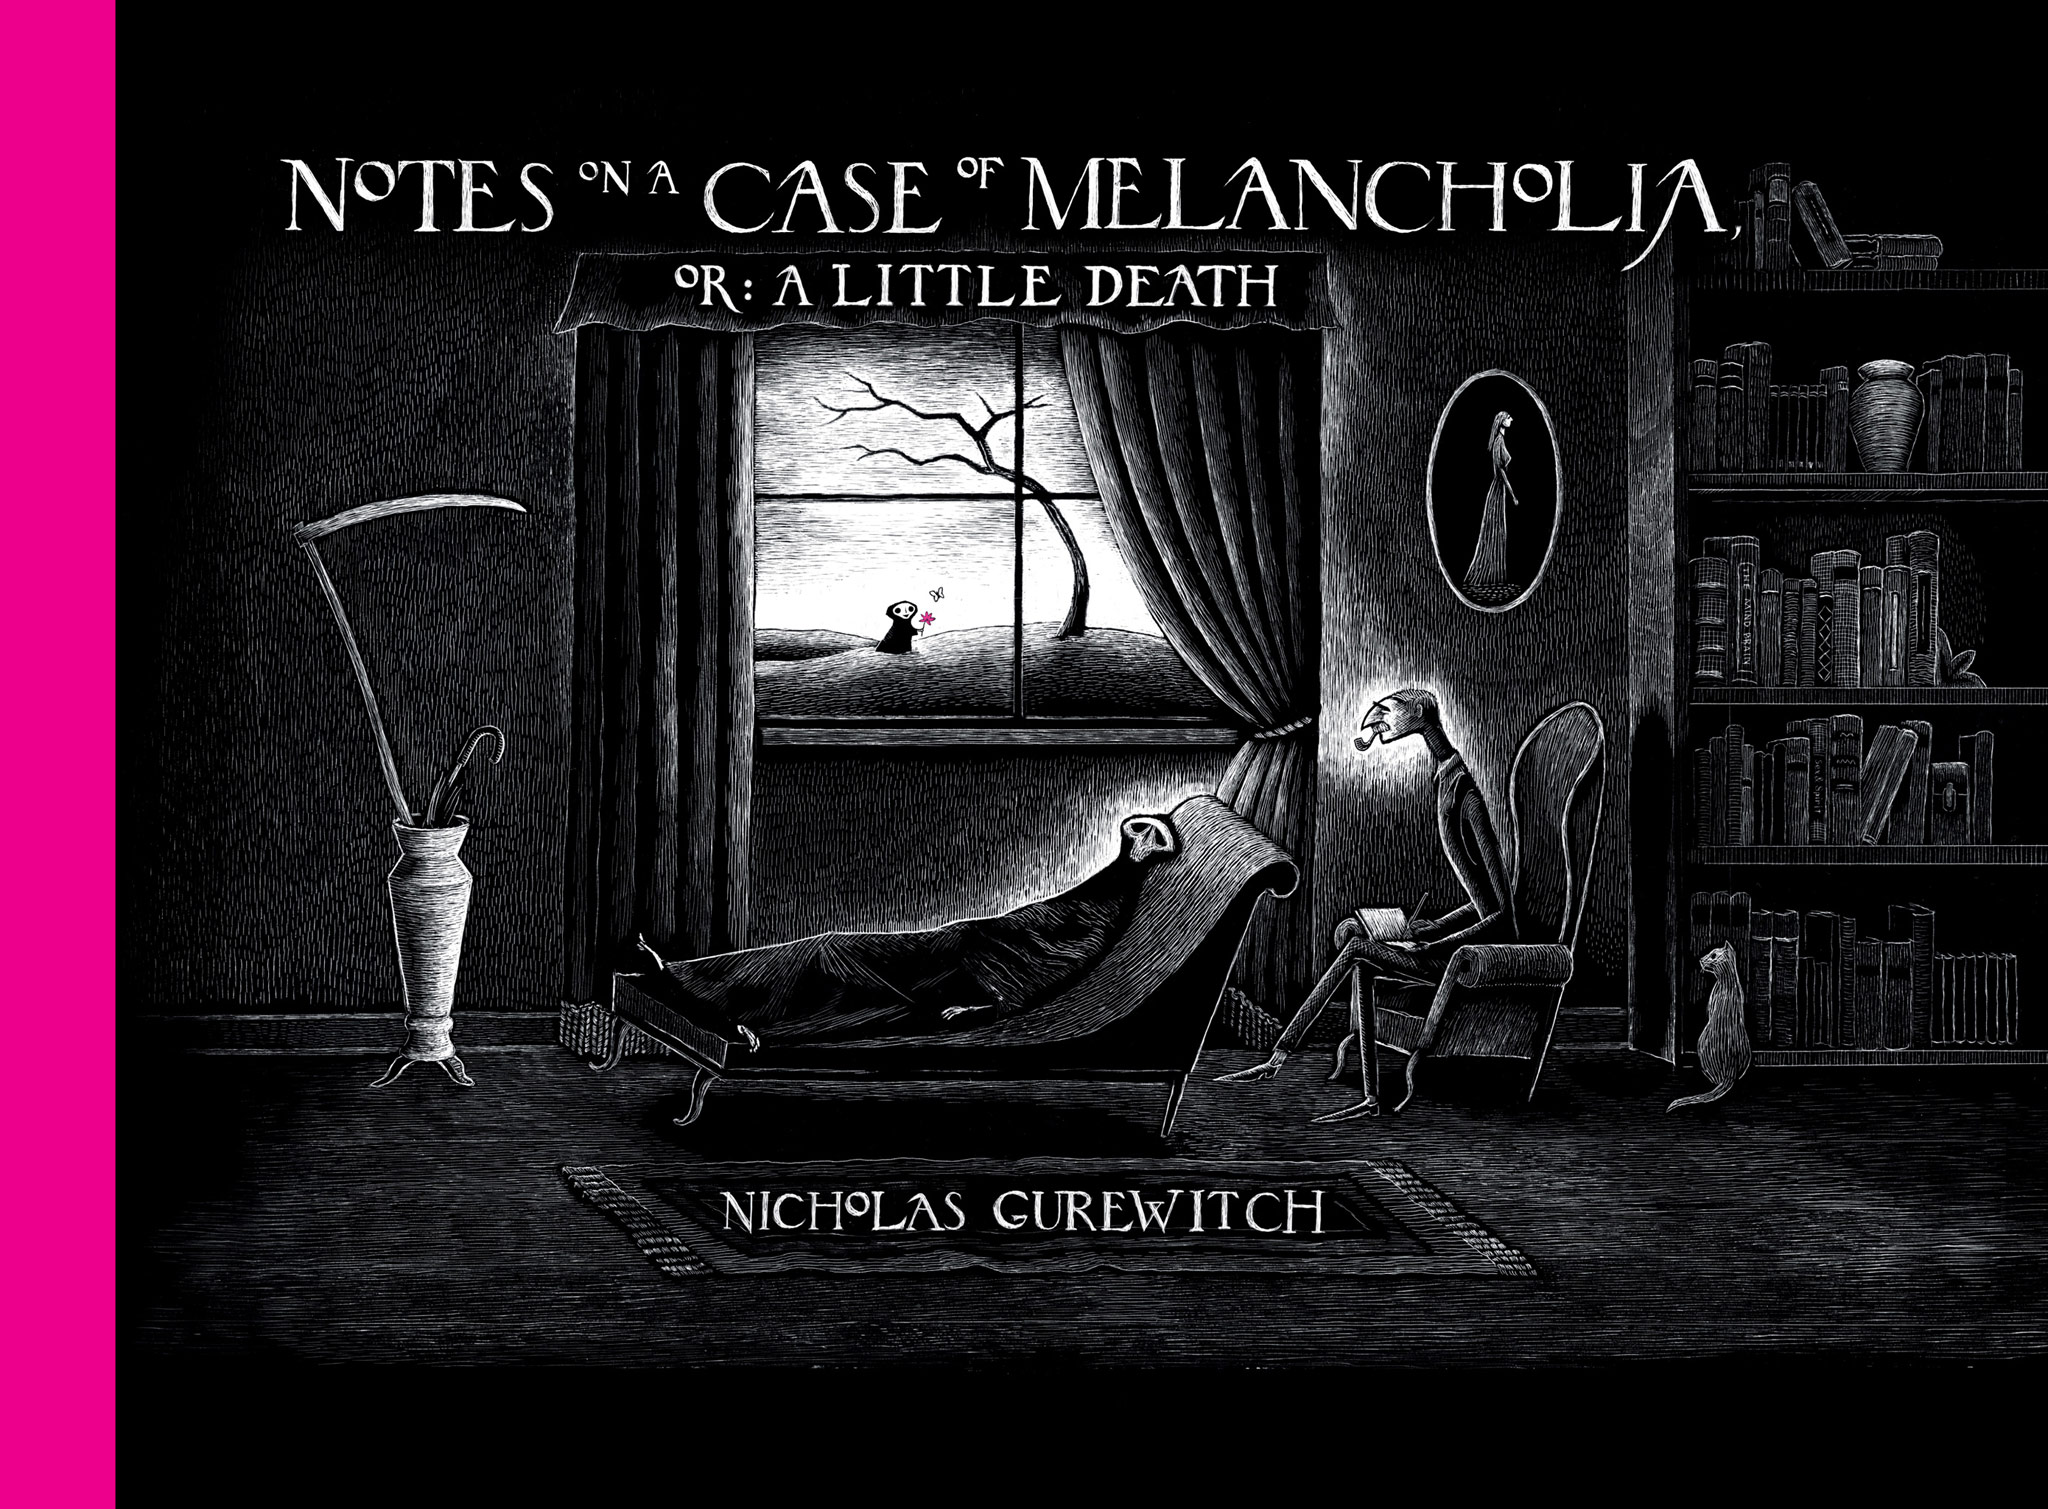 Read online Notes on a Case of Melancholia, Or: A Little Death comic -  Issue # Full - 1